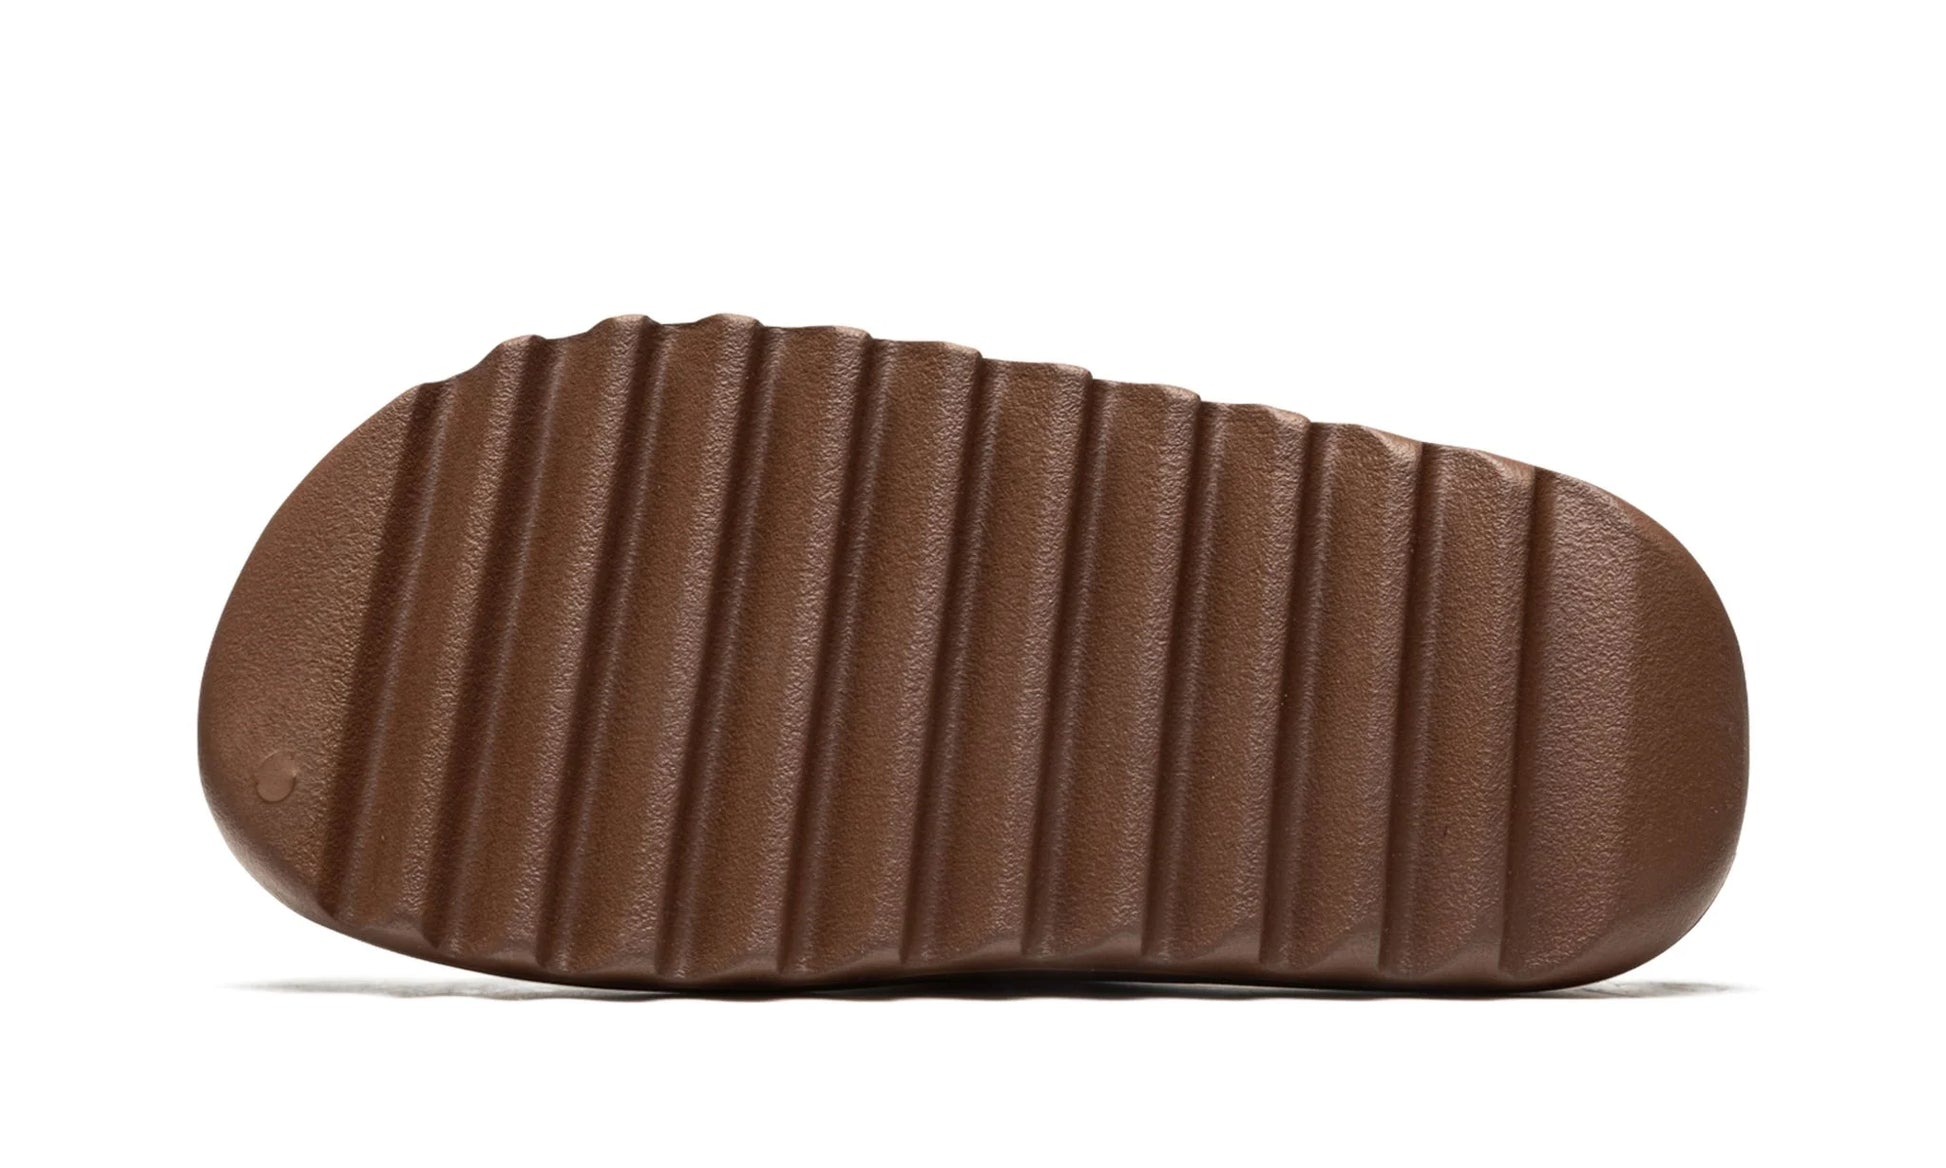 Adidas Yeezy Slide Flax Bottom Outsole VIew